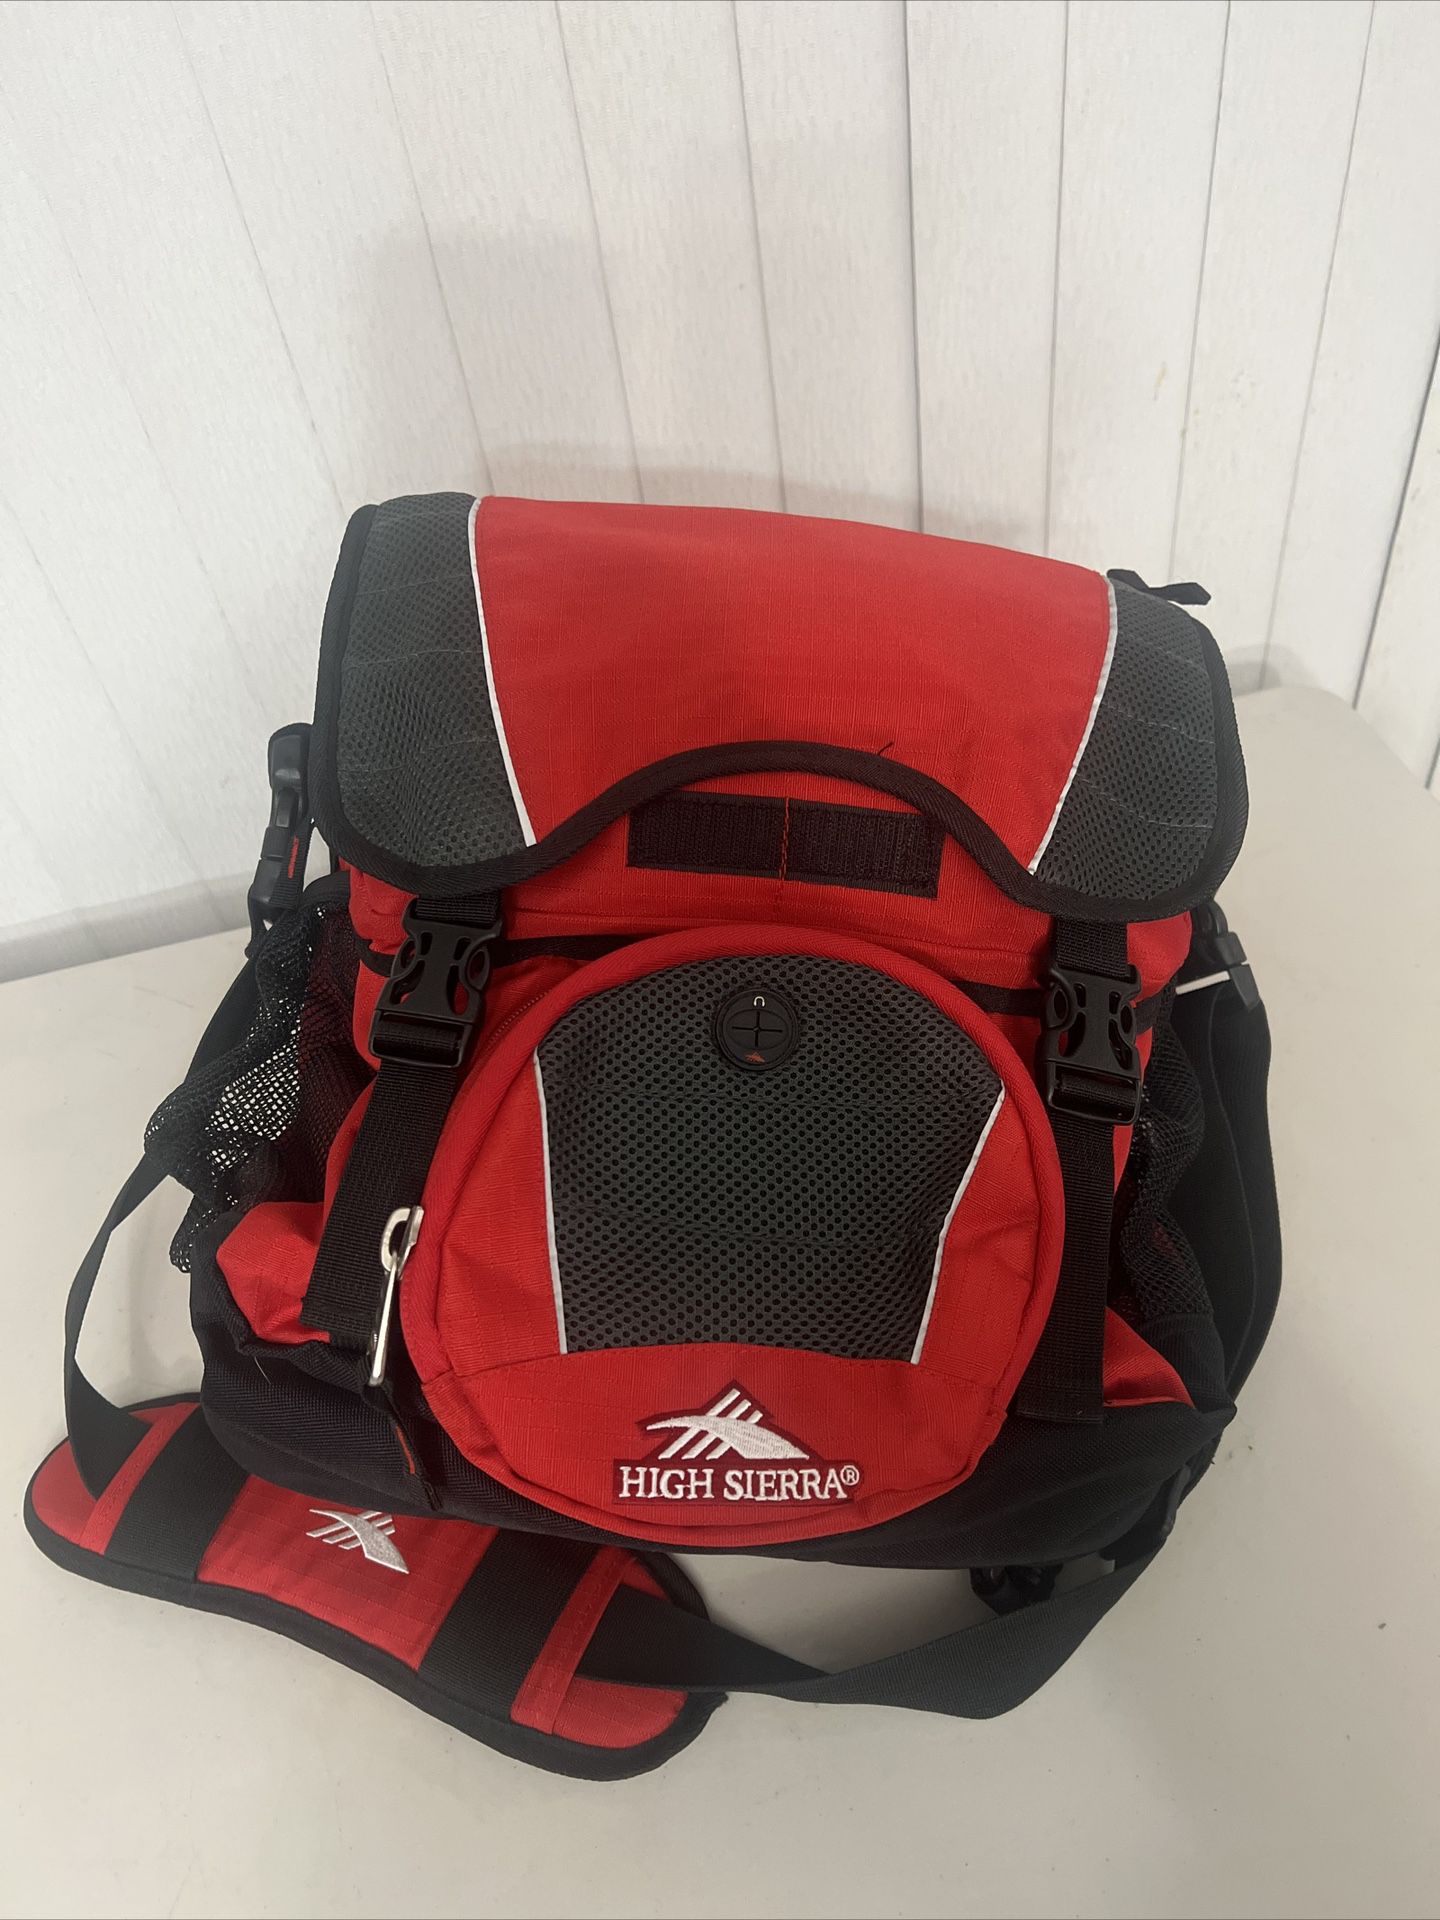 High Sierra Red Multi Function Backpack Shoulder Bag Great Condition. This backpack is small but versatile and is in excellent cosmetic condition and 